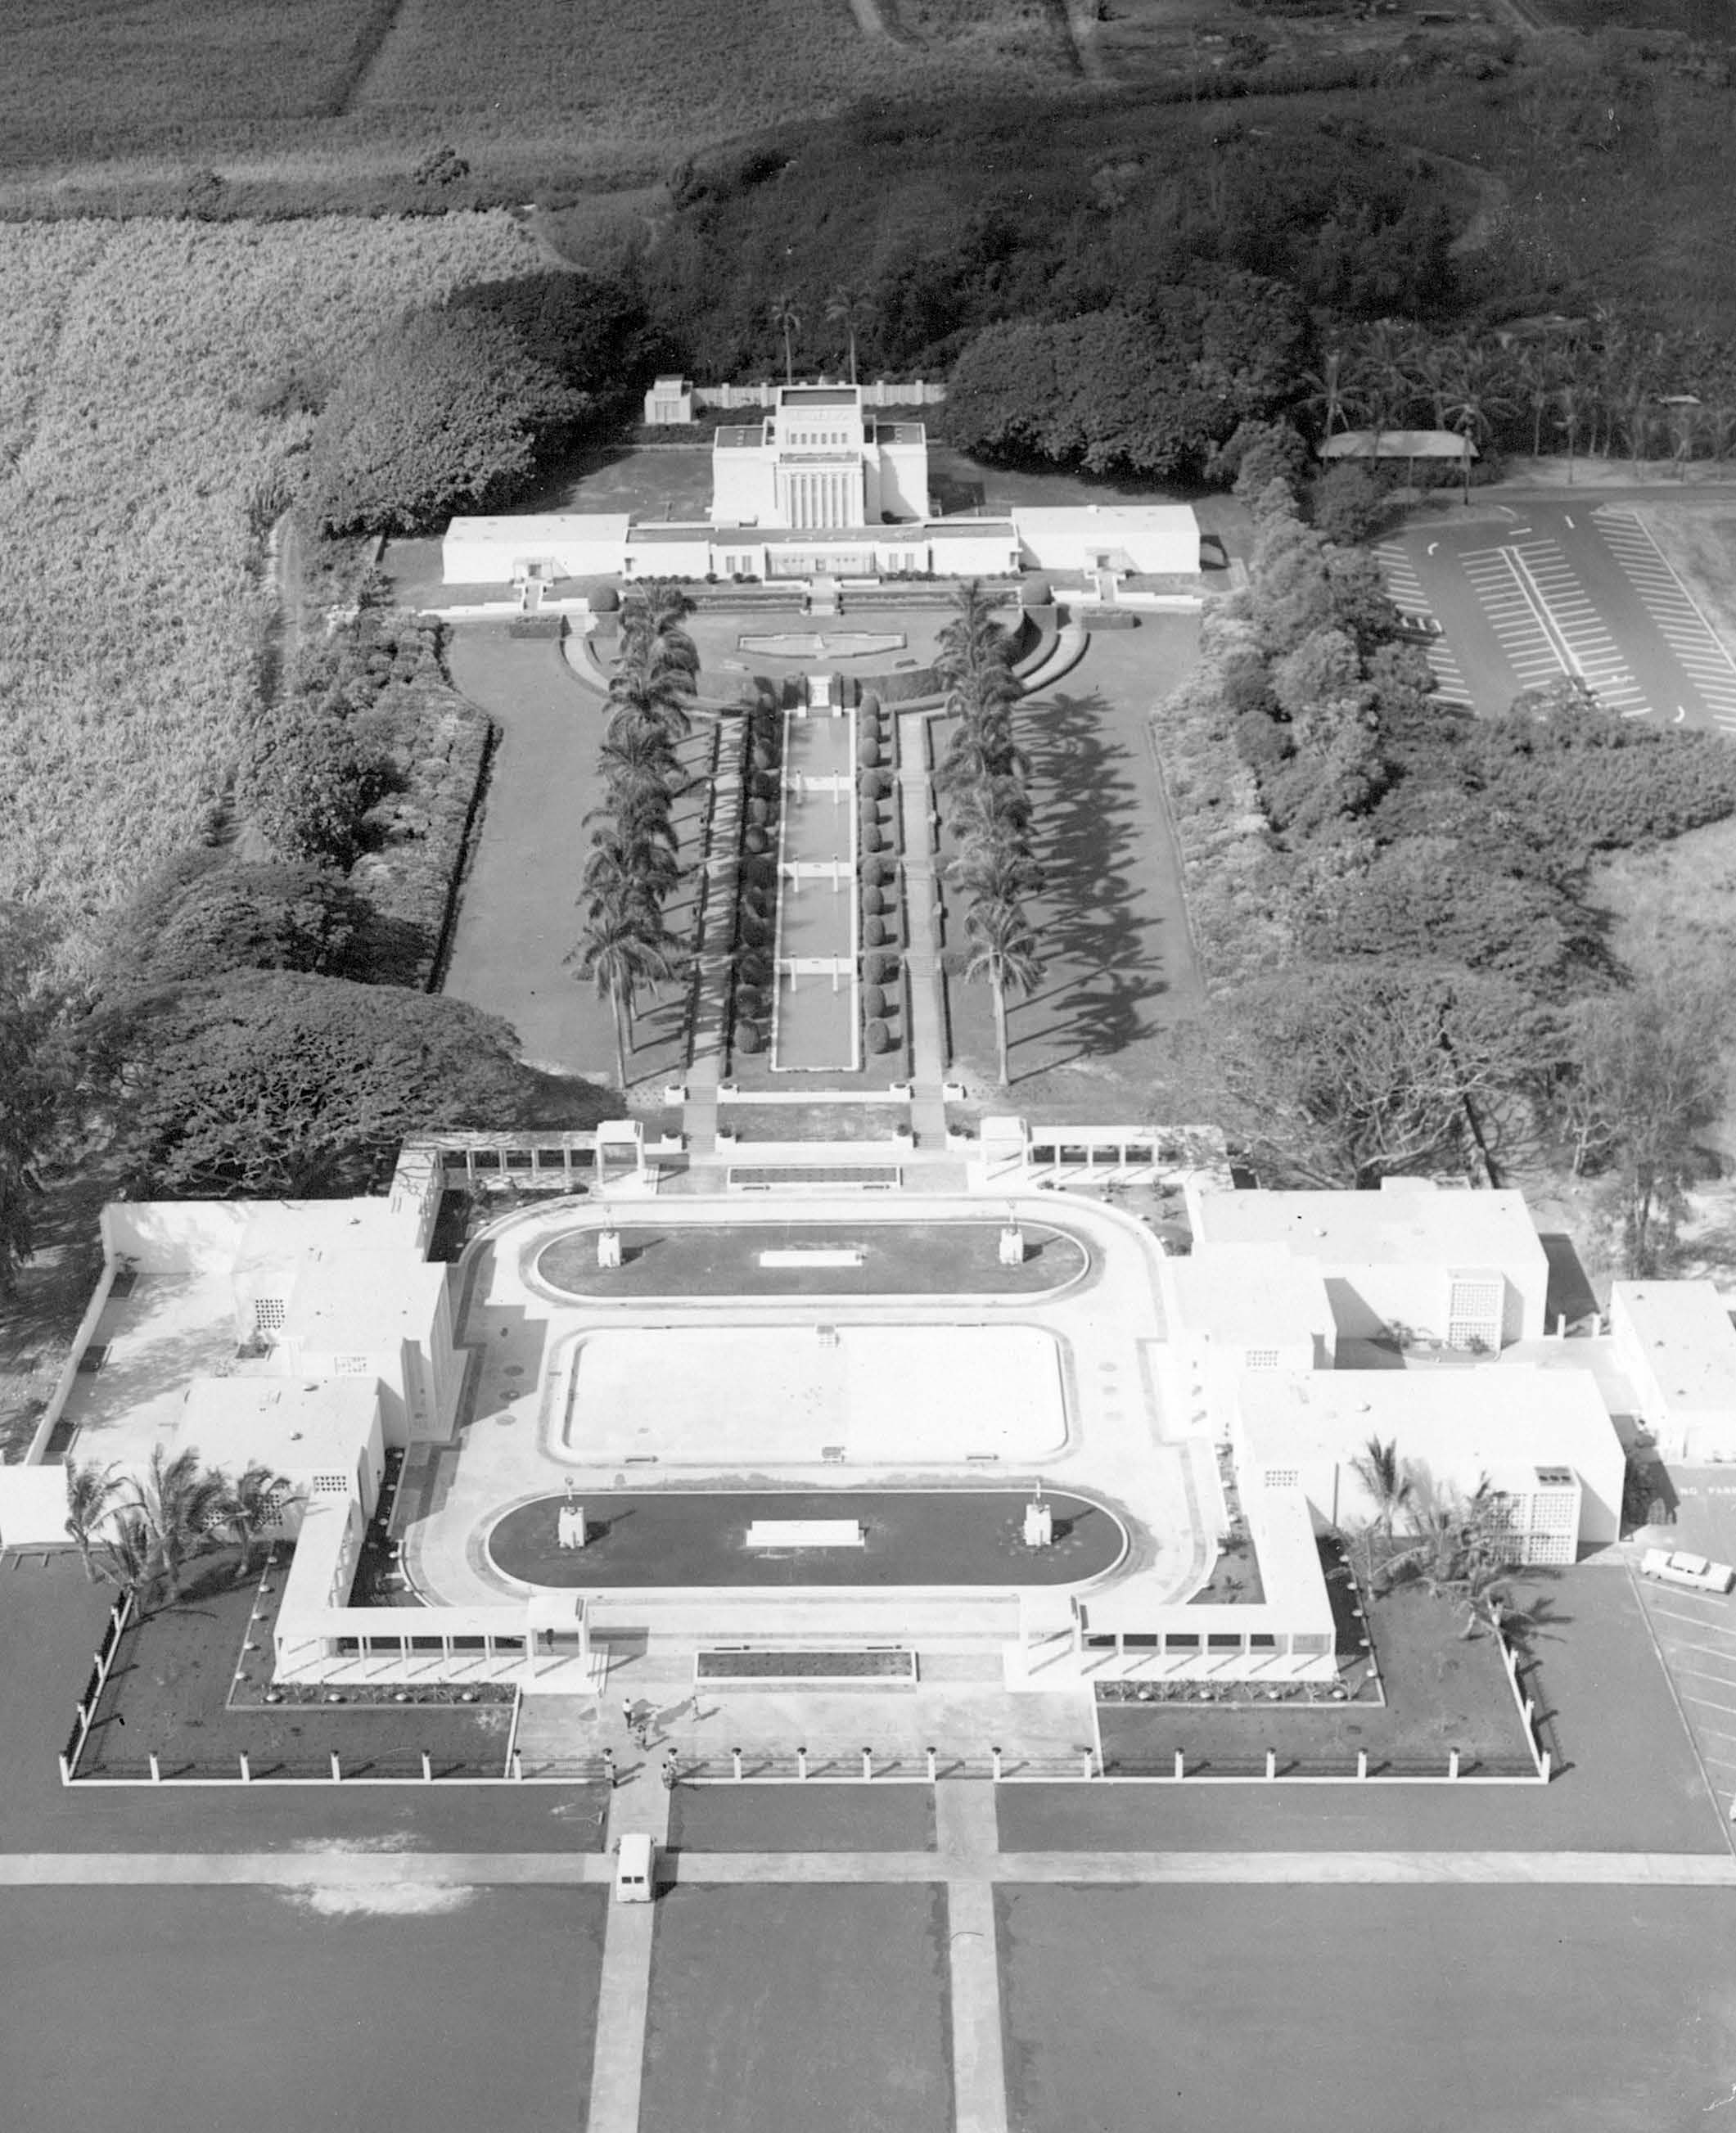 Aerial view of the temple and its new visitors’ center, circa 1962. Courtesy of David Hannemann.